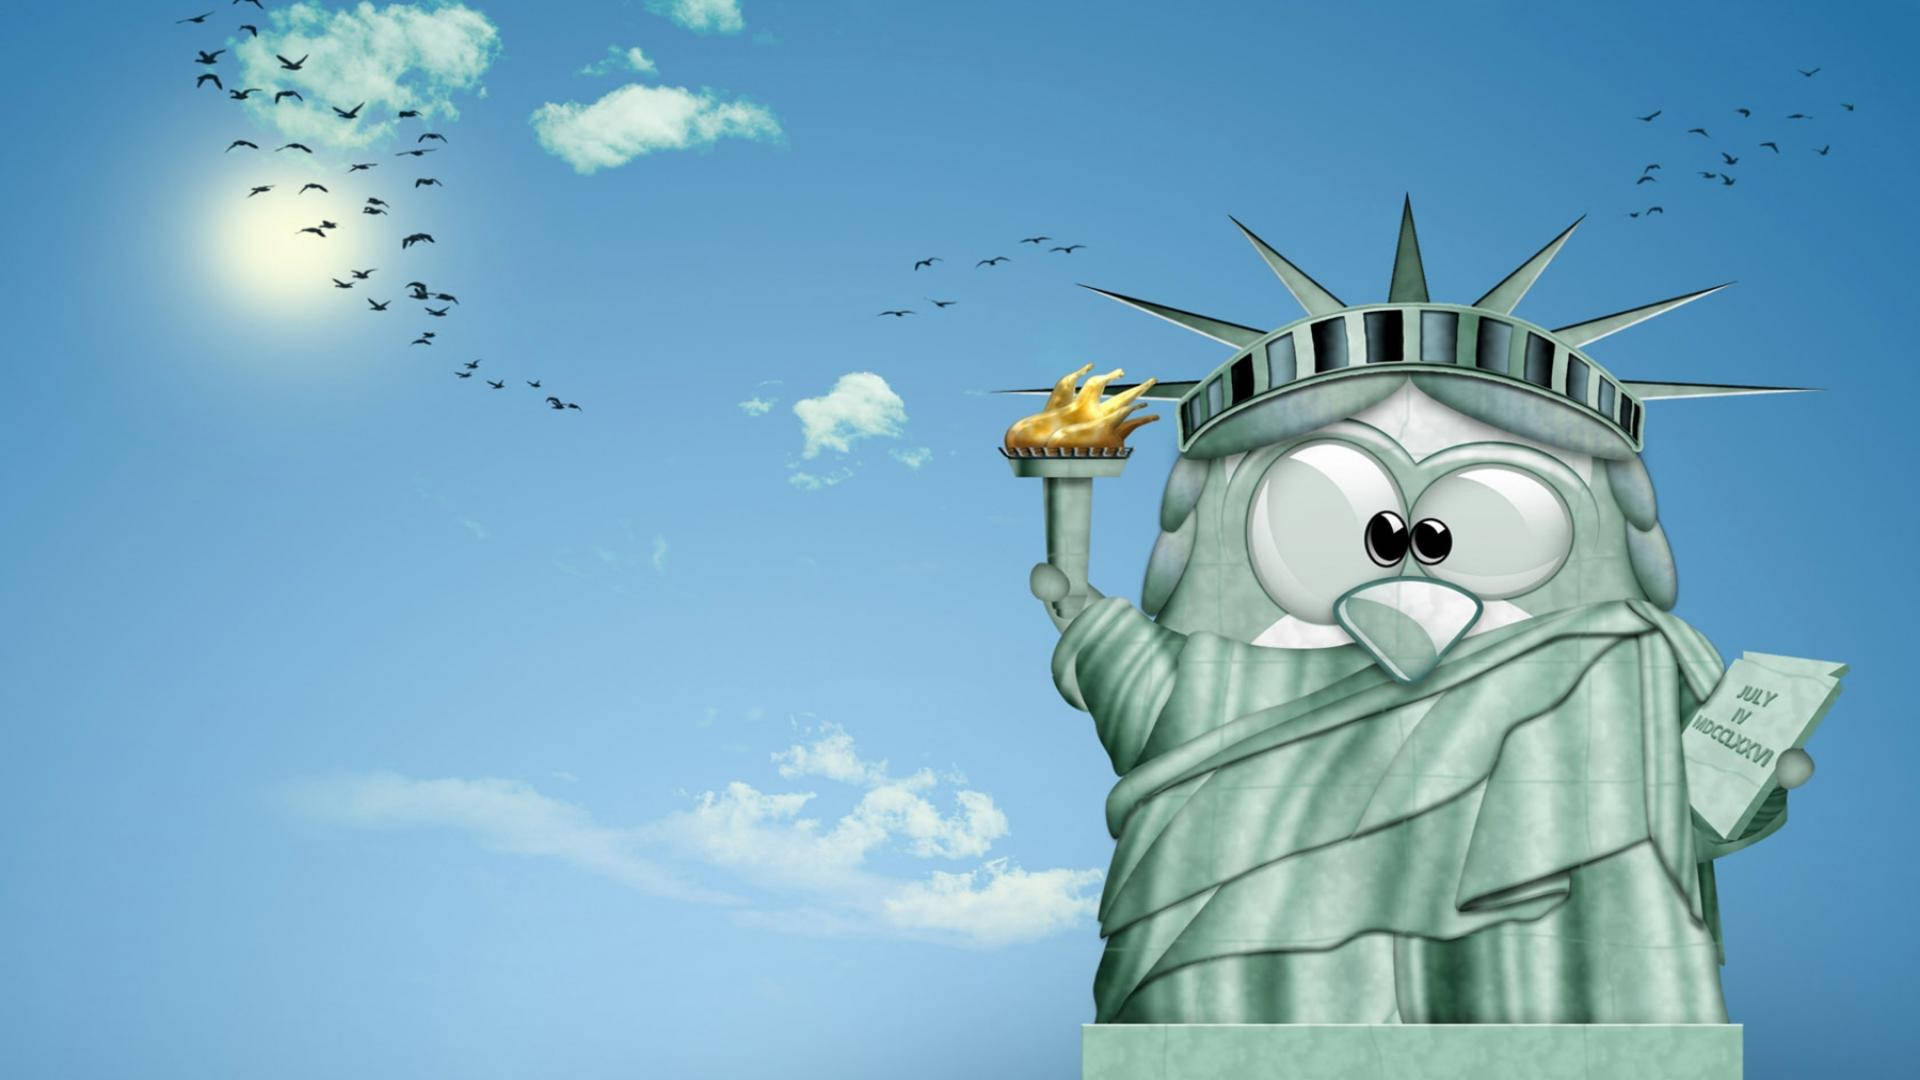 Funny Cartoon Statue Of Liberty Penguin Background